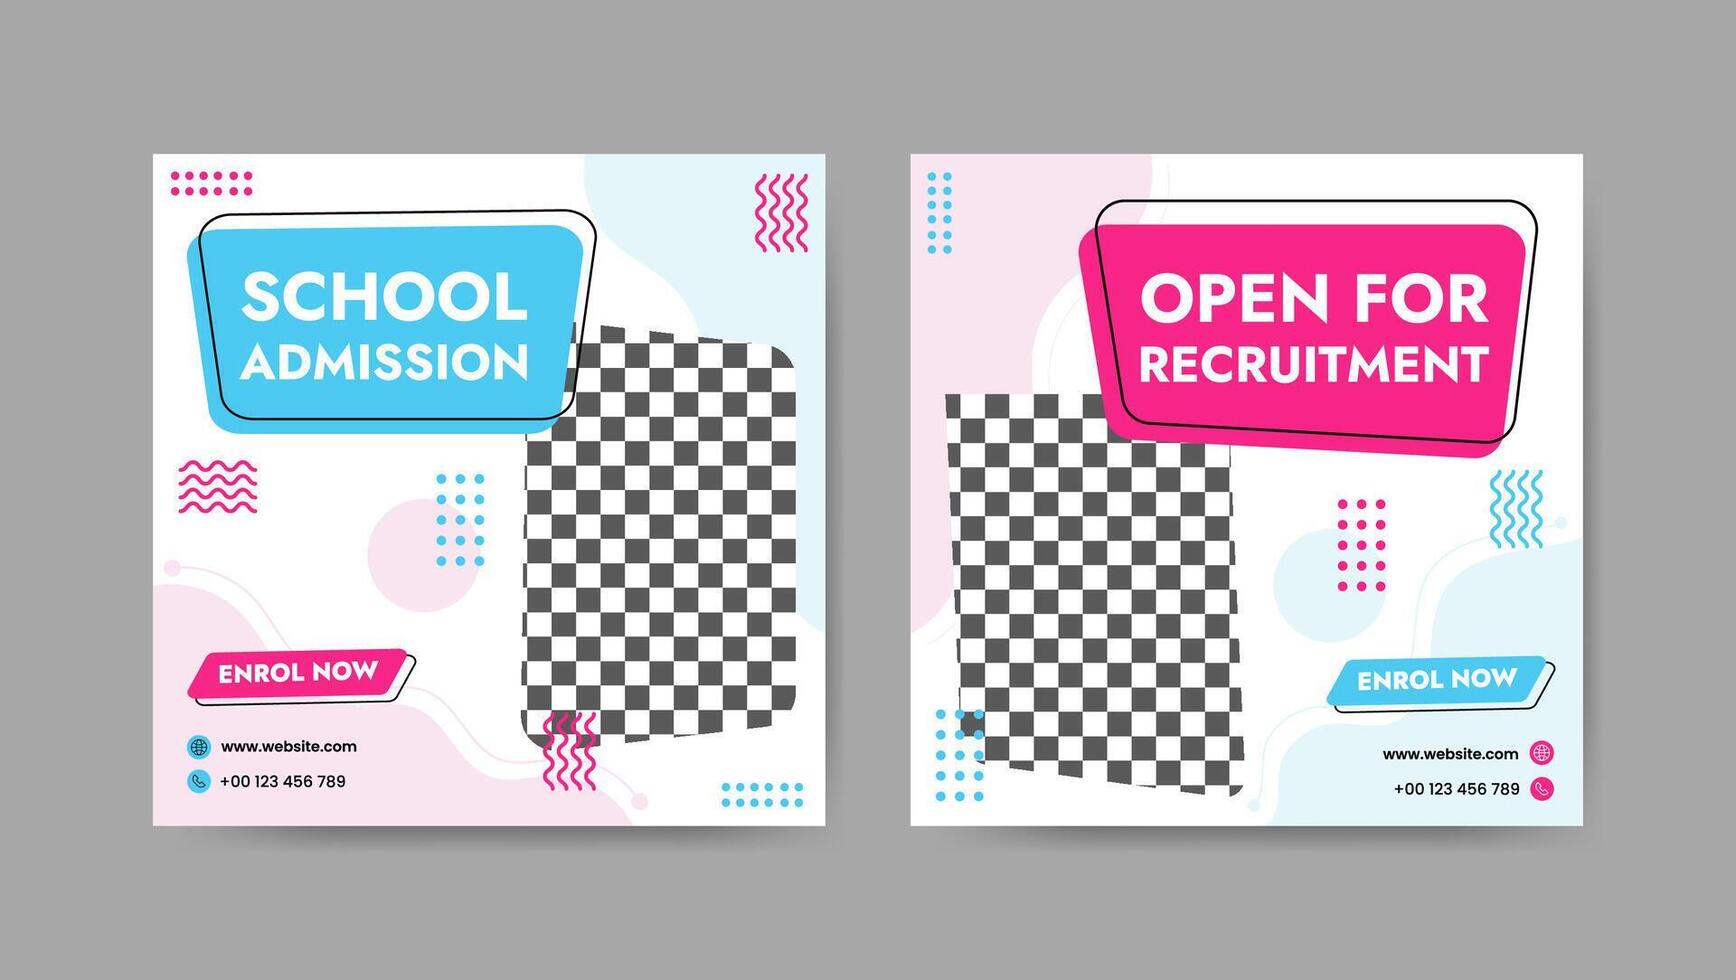 Collection of trendy school admissions and educational social media post templates. Square banner design background. vector